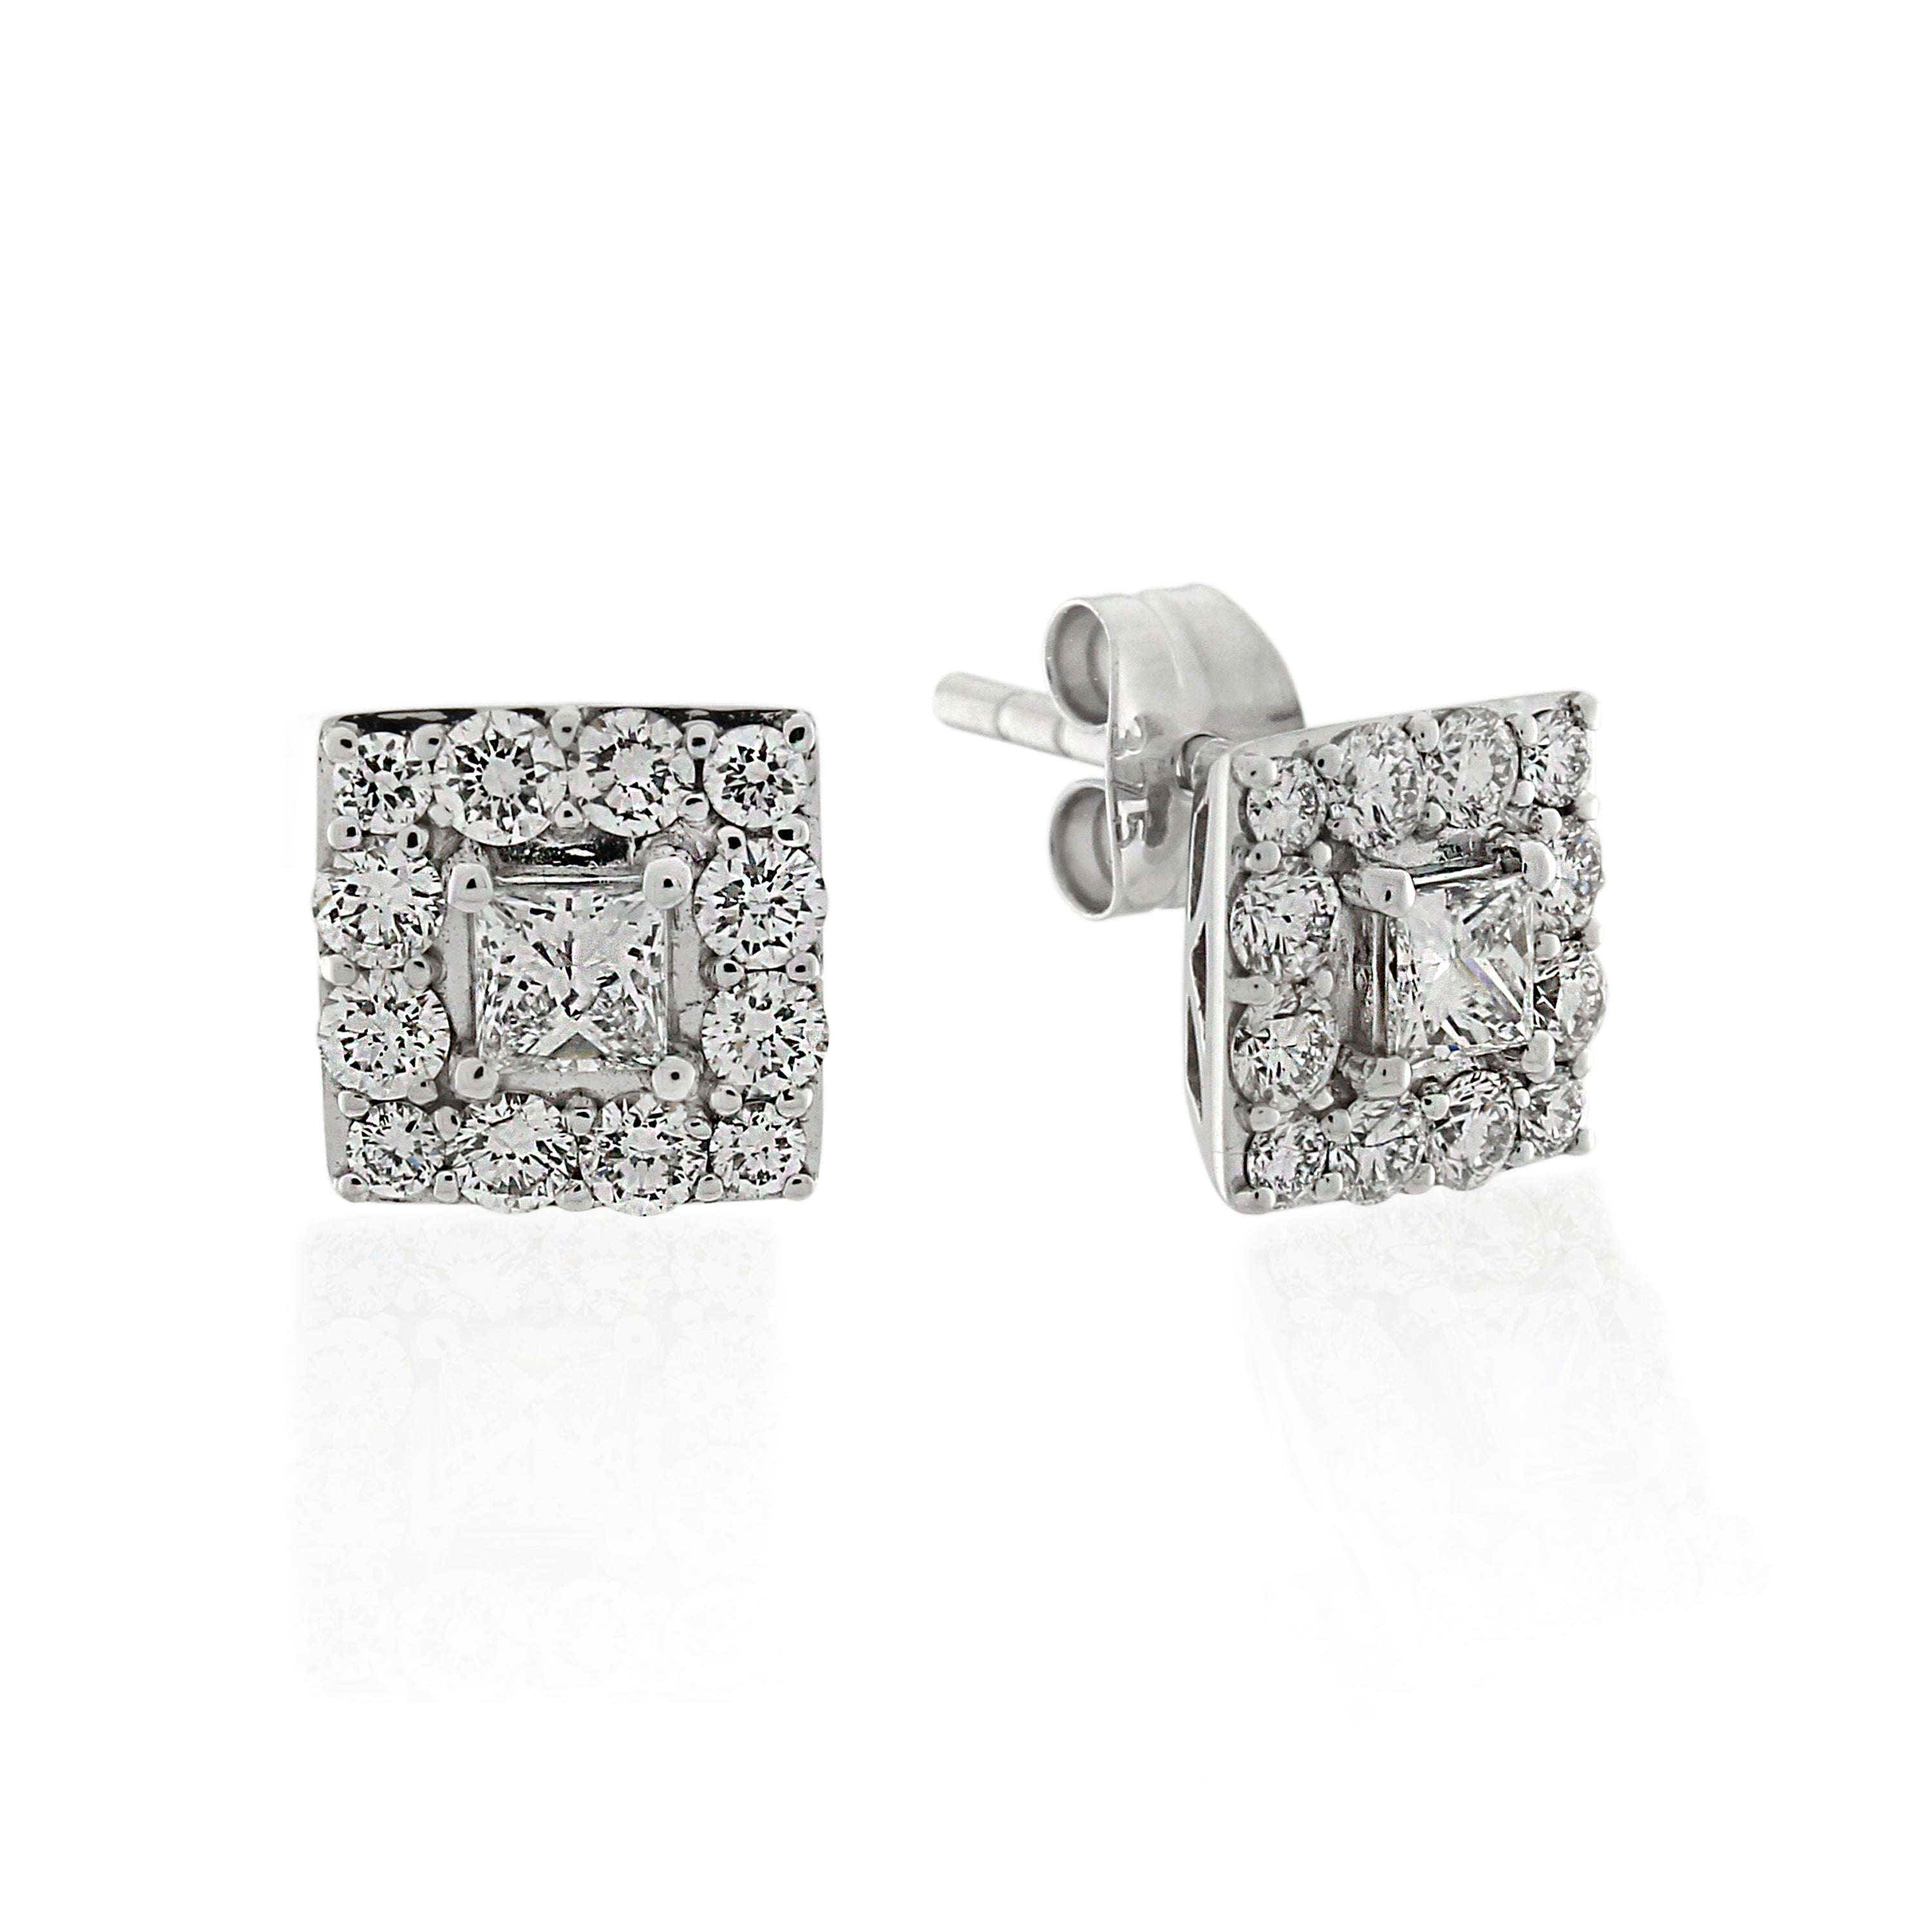 18ct White Gold Diamond Square Cluster Halo Earrings .74ct TW